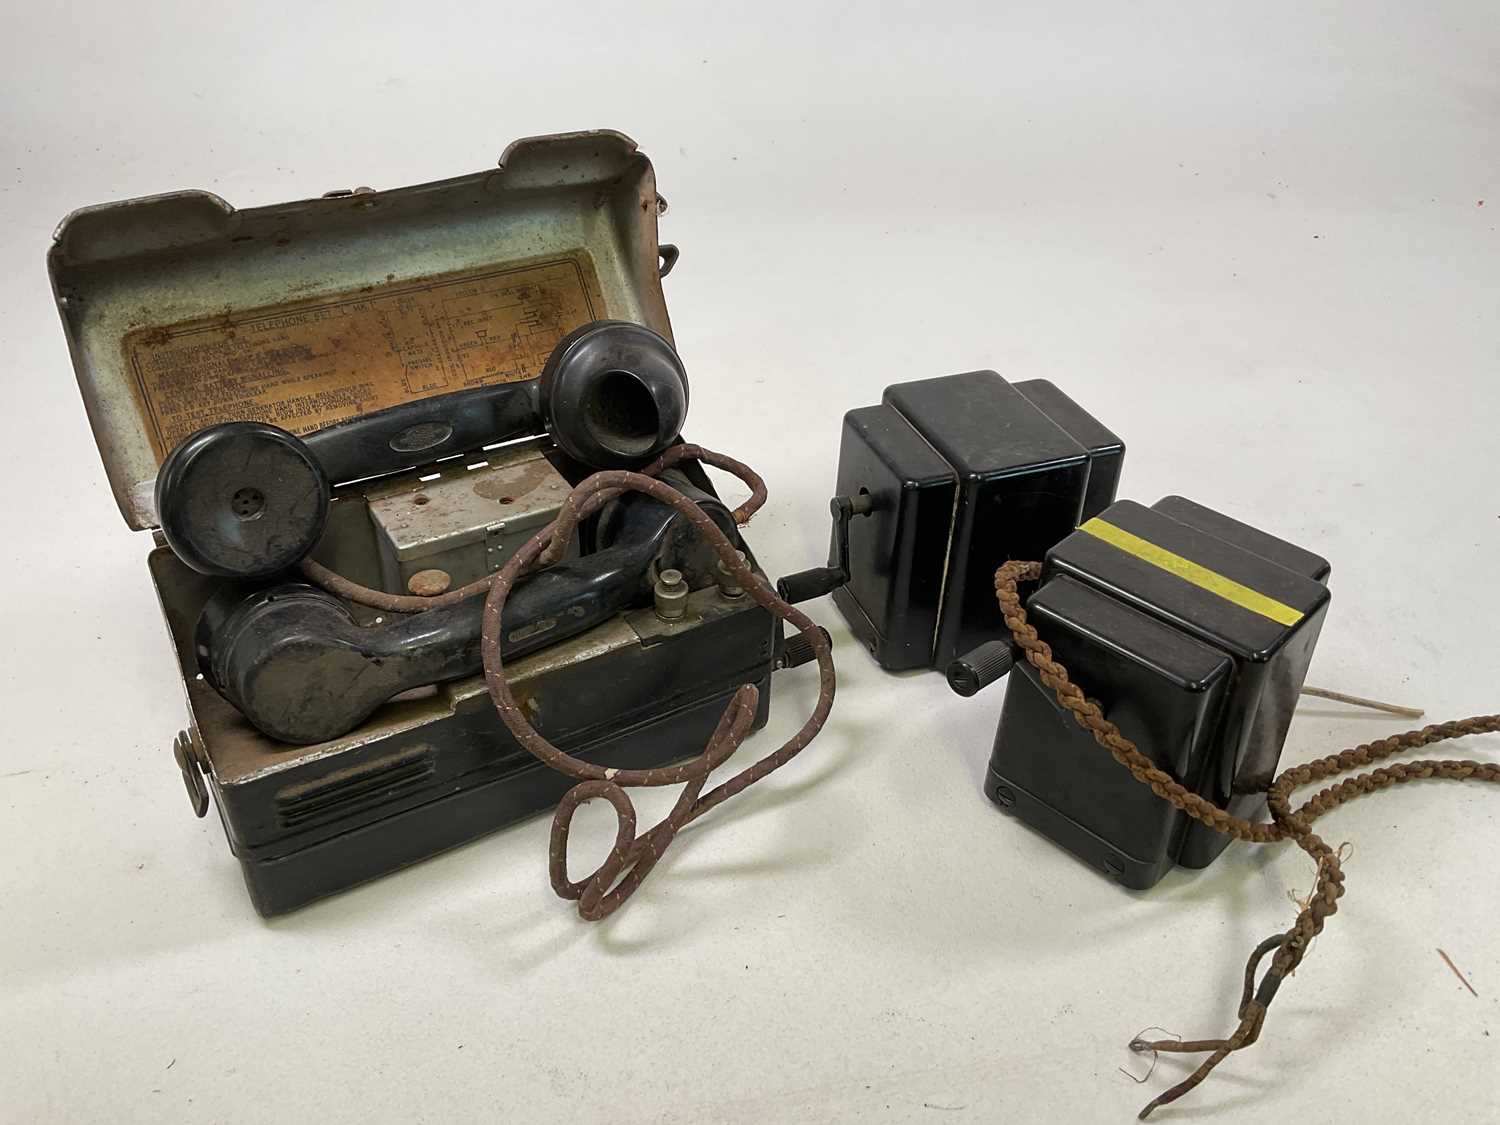 A collection of vintage telephones including three bakelite phones with rotary dials, a Sterdy - Bild 4 aus 4